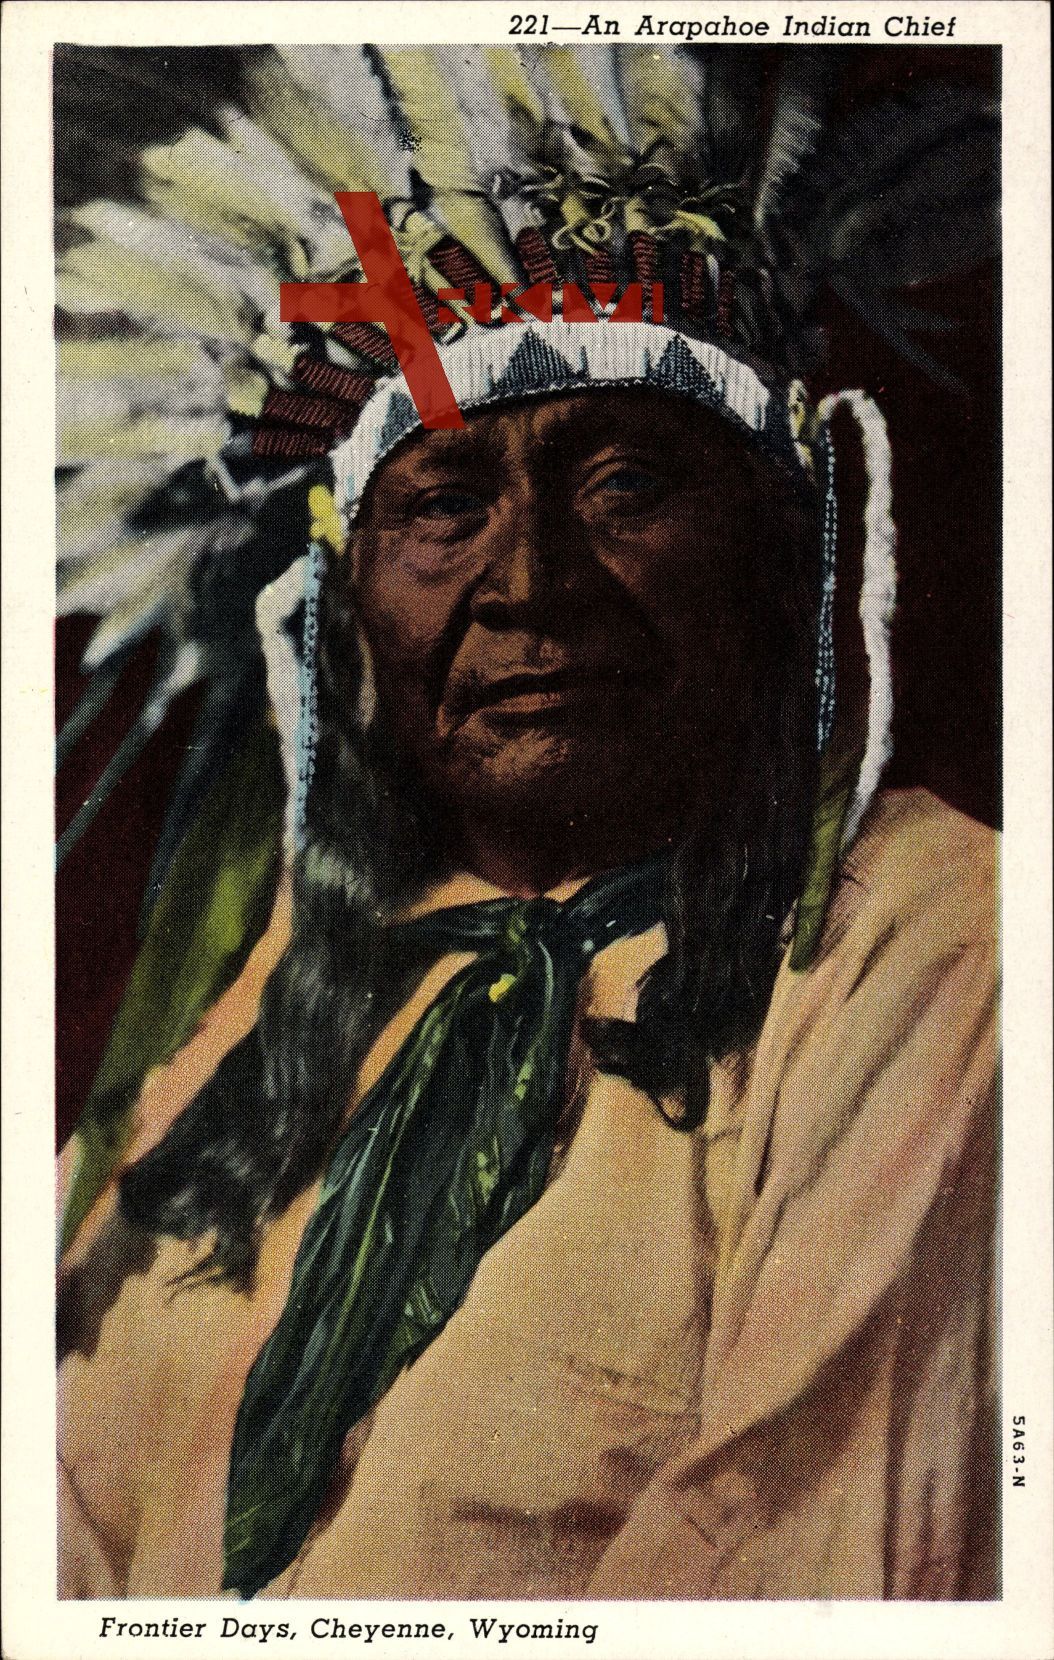 Frontier Days, Cheyenne, Wyoming, An Arapahoe Indian Chief